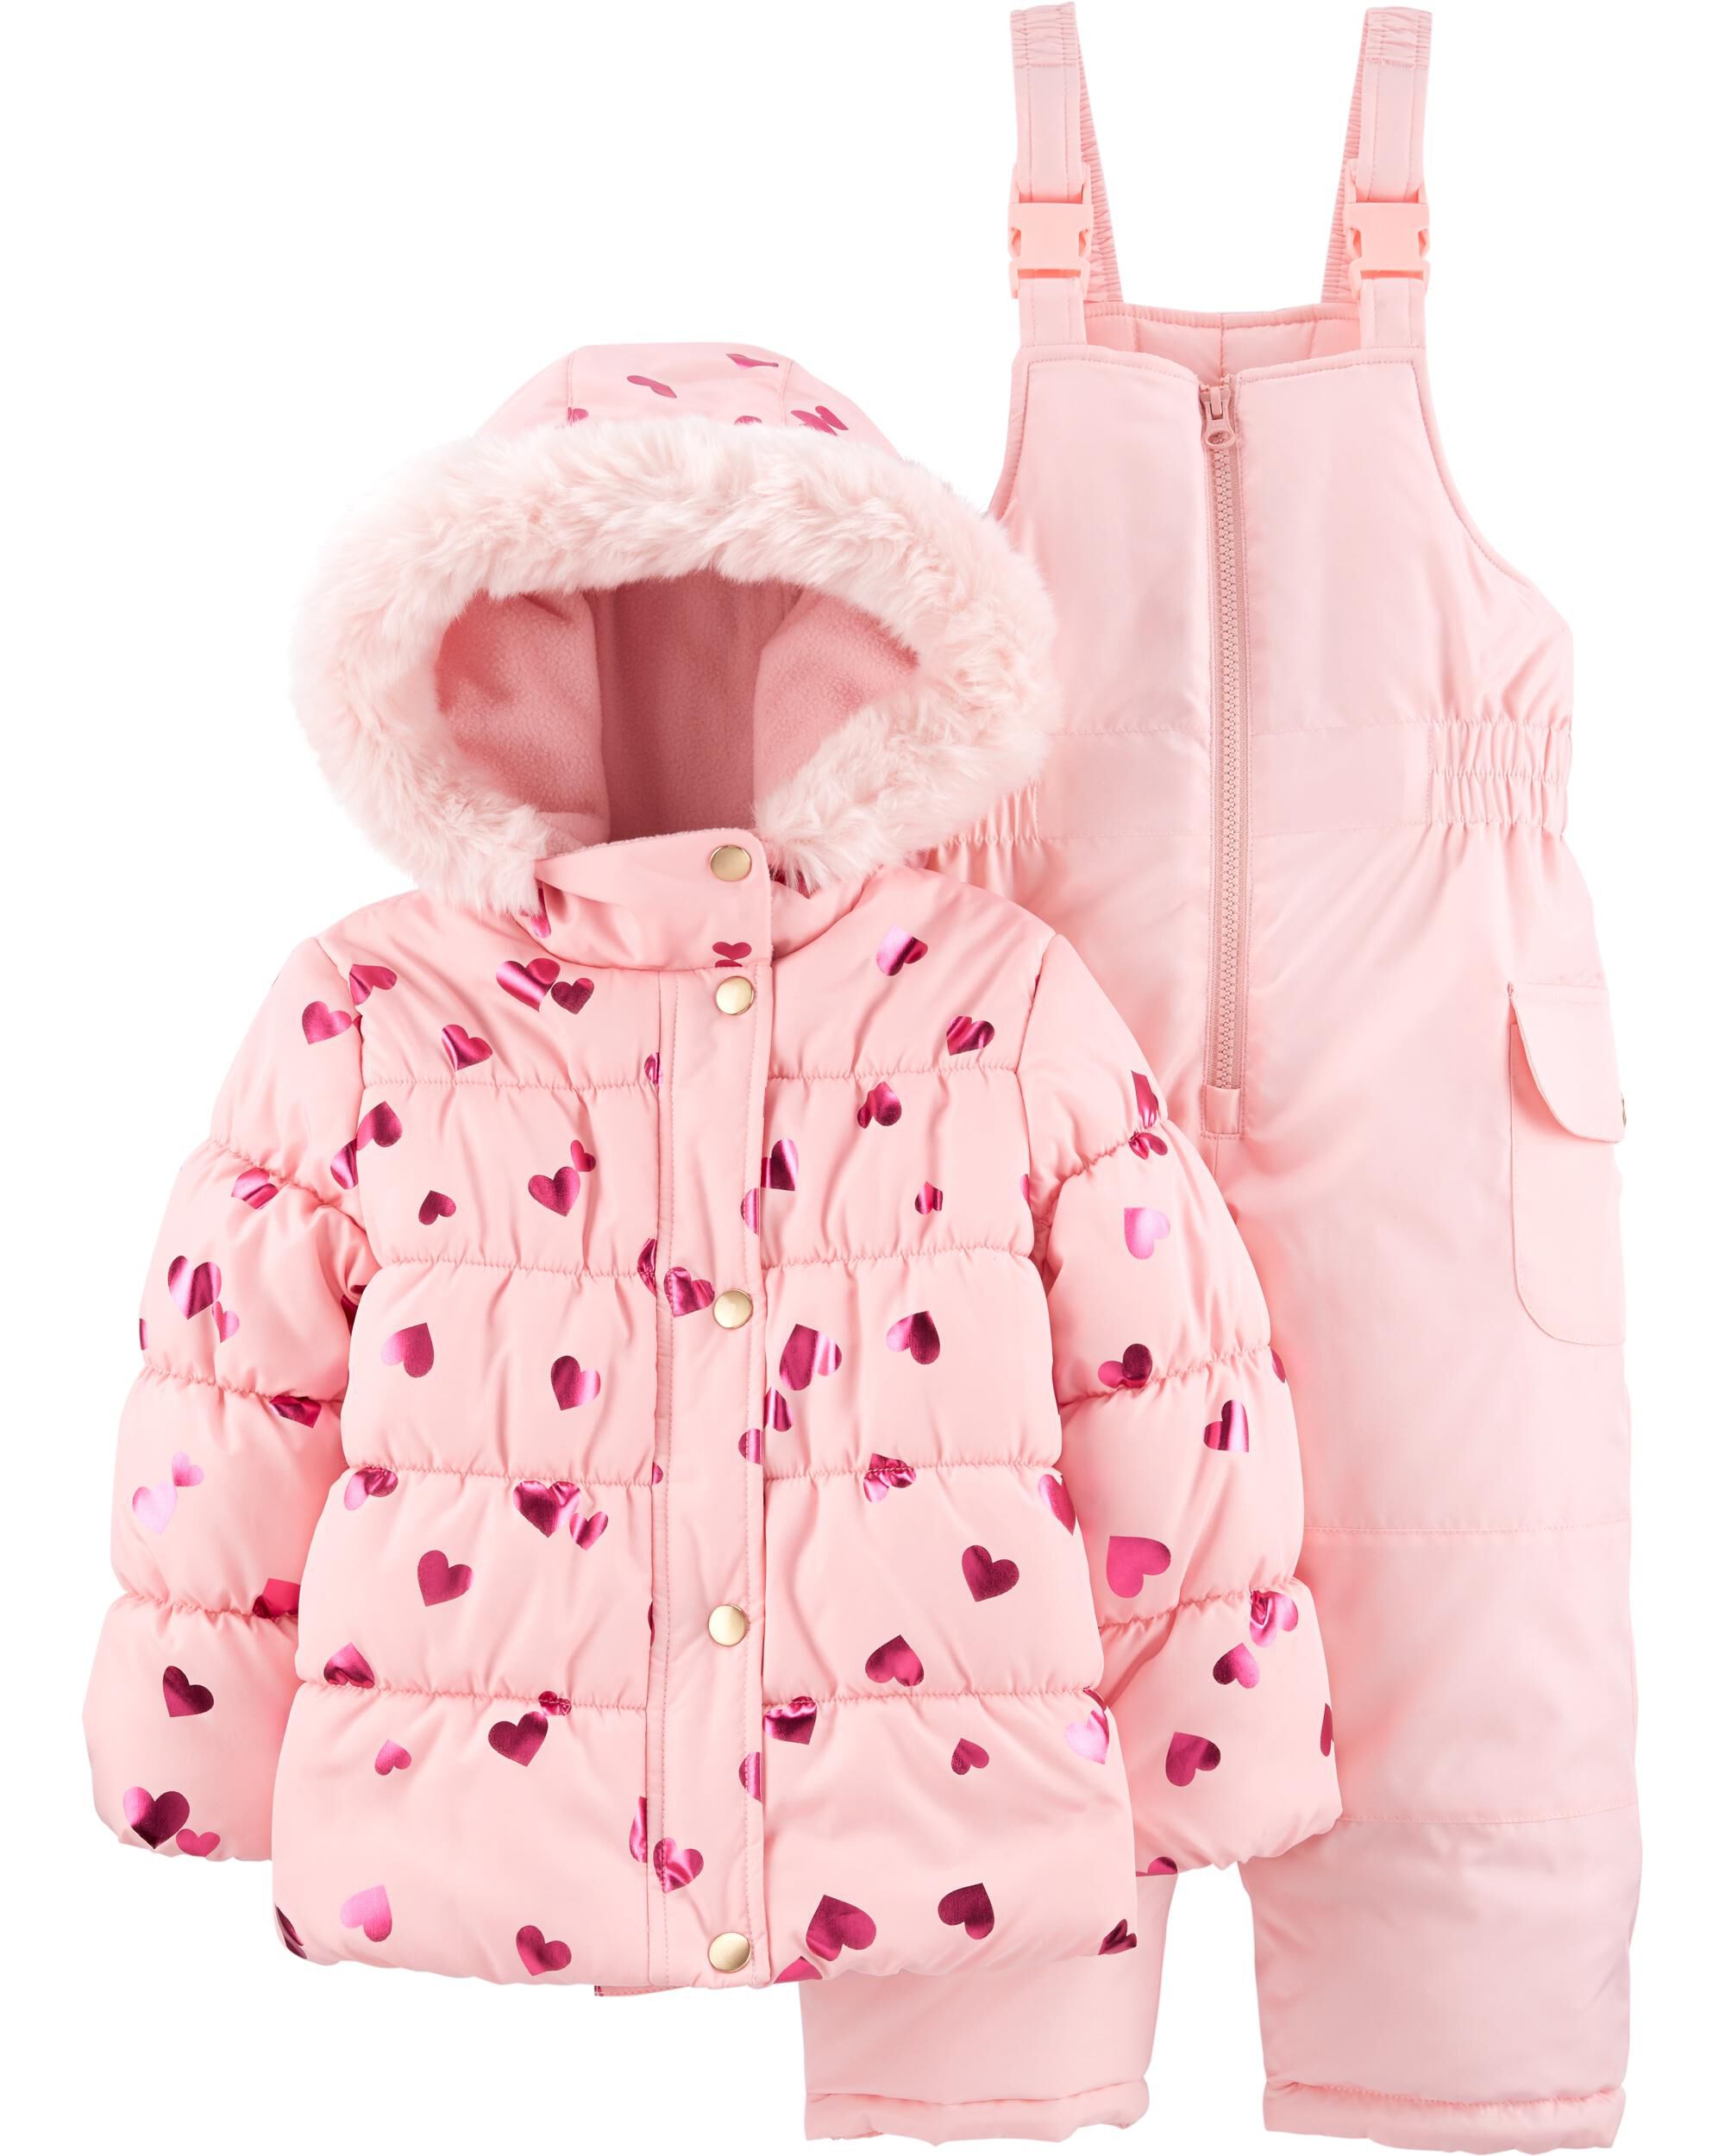 Happy Cherry Toddler Down Jacket Removable Hooded Windproof Snow Winter Coat Outwear